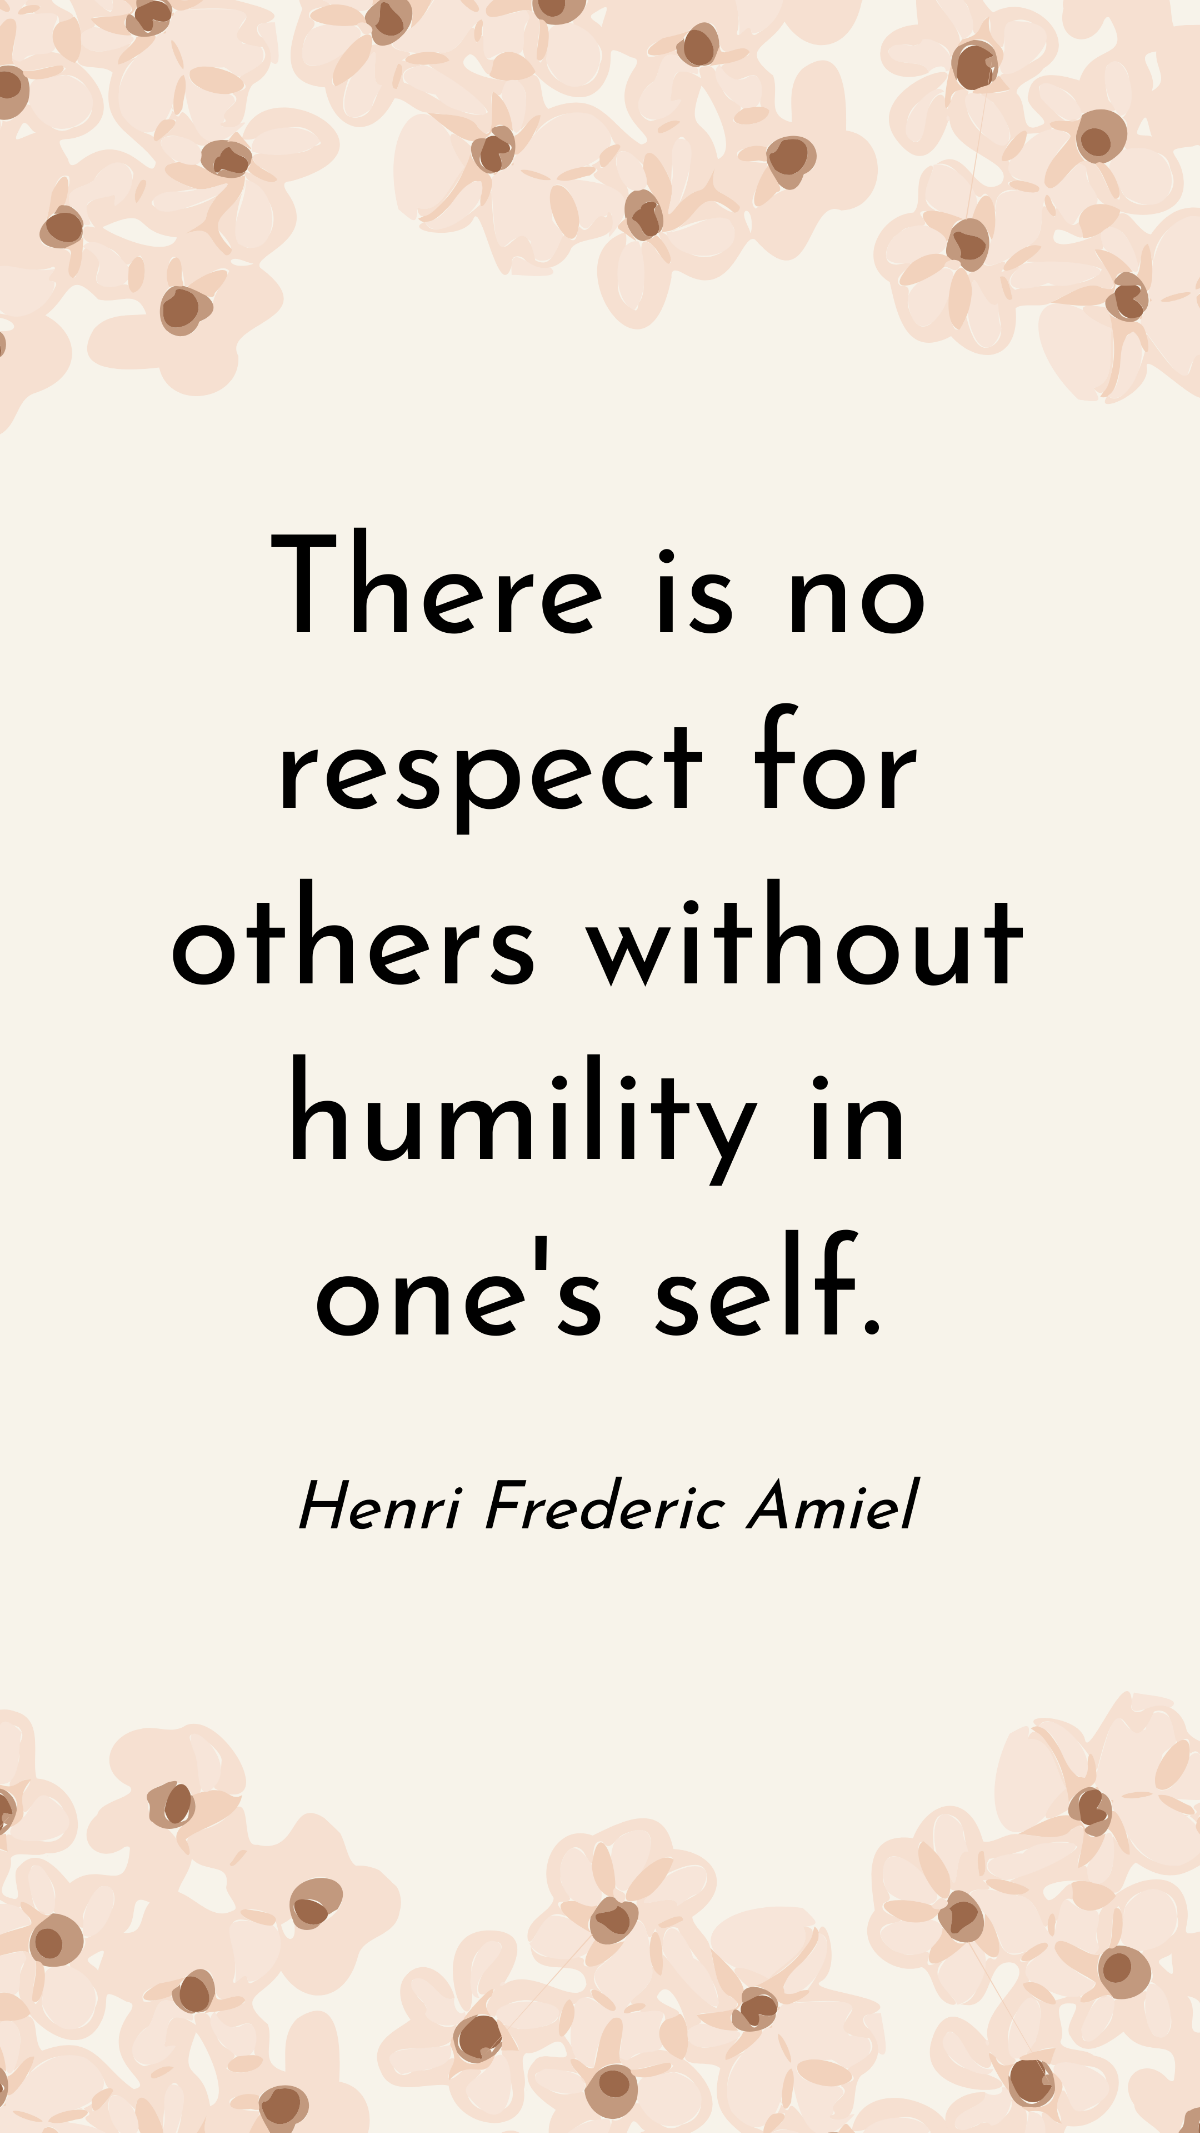 Henri Frederic Amiel - There is no respect for others without humility in one's self. Template